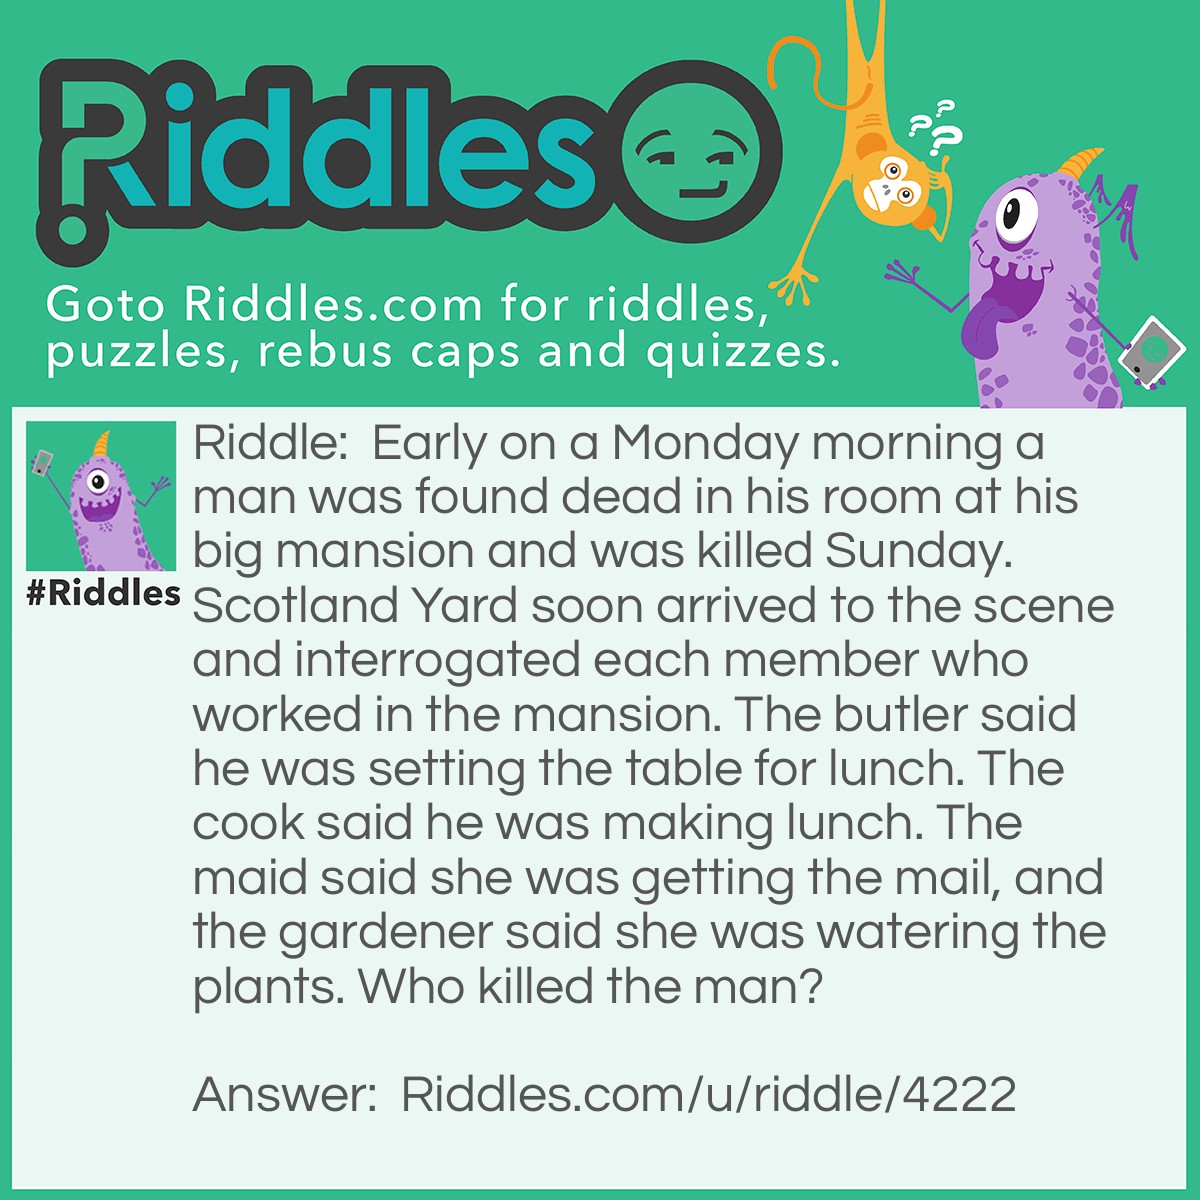 Riddle: Early on a Monday morning a man was found dead in his room at his big mansion and was killed Sunday. Scotland Yard soon arrived to the scene and interrogated each member who worked in the mansion. The butler said he was setting the table for lunch. The cook said he was making lunch. The maid said she was getting the mail, and the gardener said she was watering the plants. Who killed the man? Answer: The maid because the mail is not delivered on Sundays.